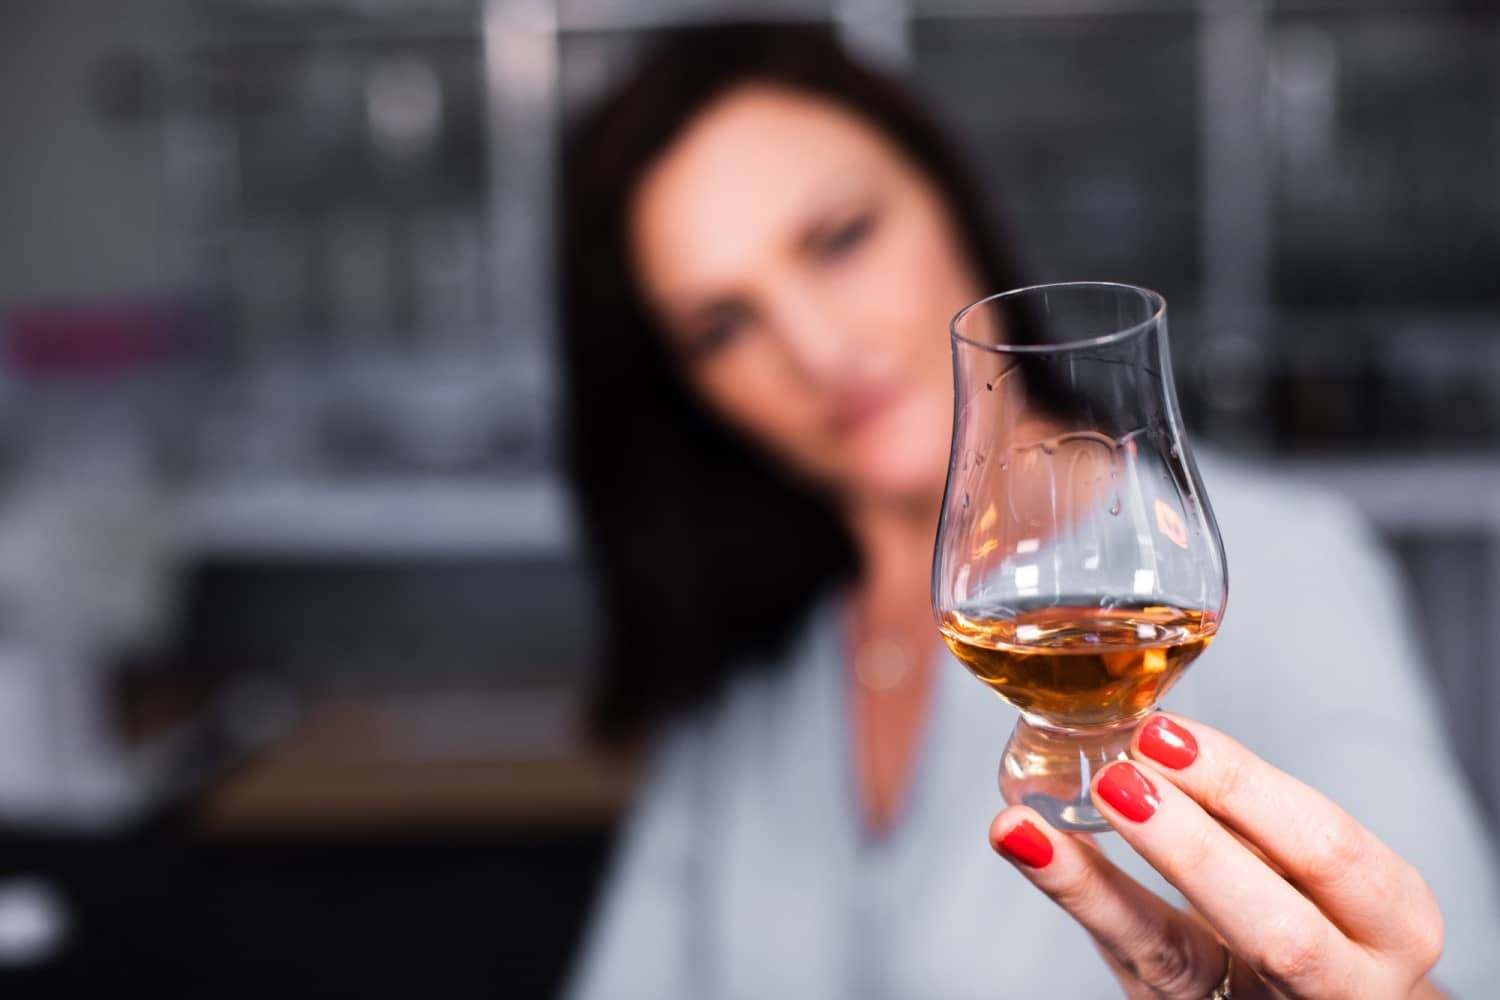 aromas and flavours change regarding the several types of scotch whisky